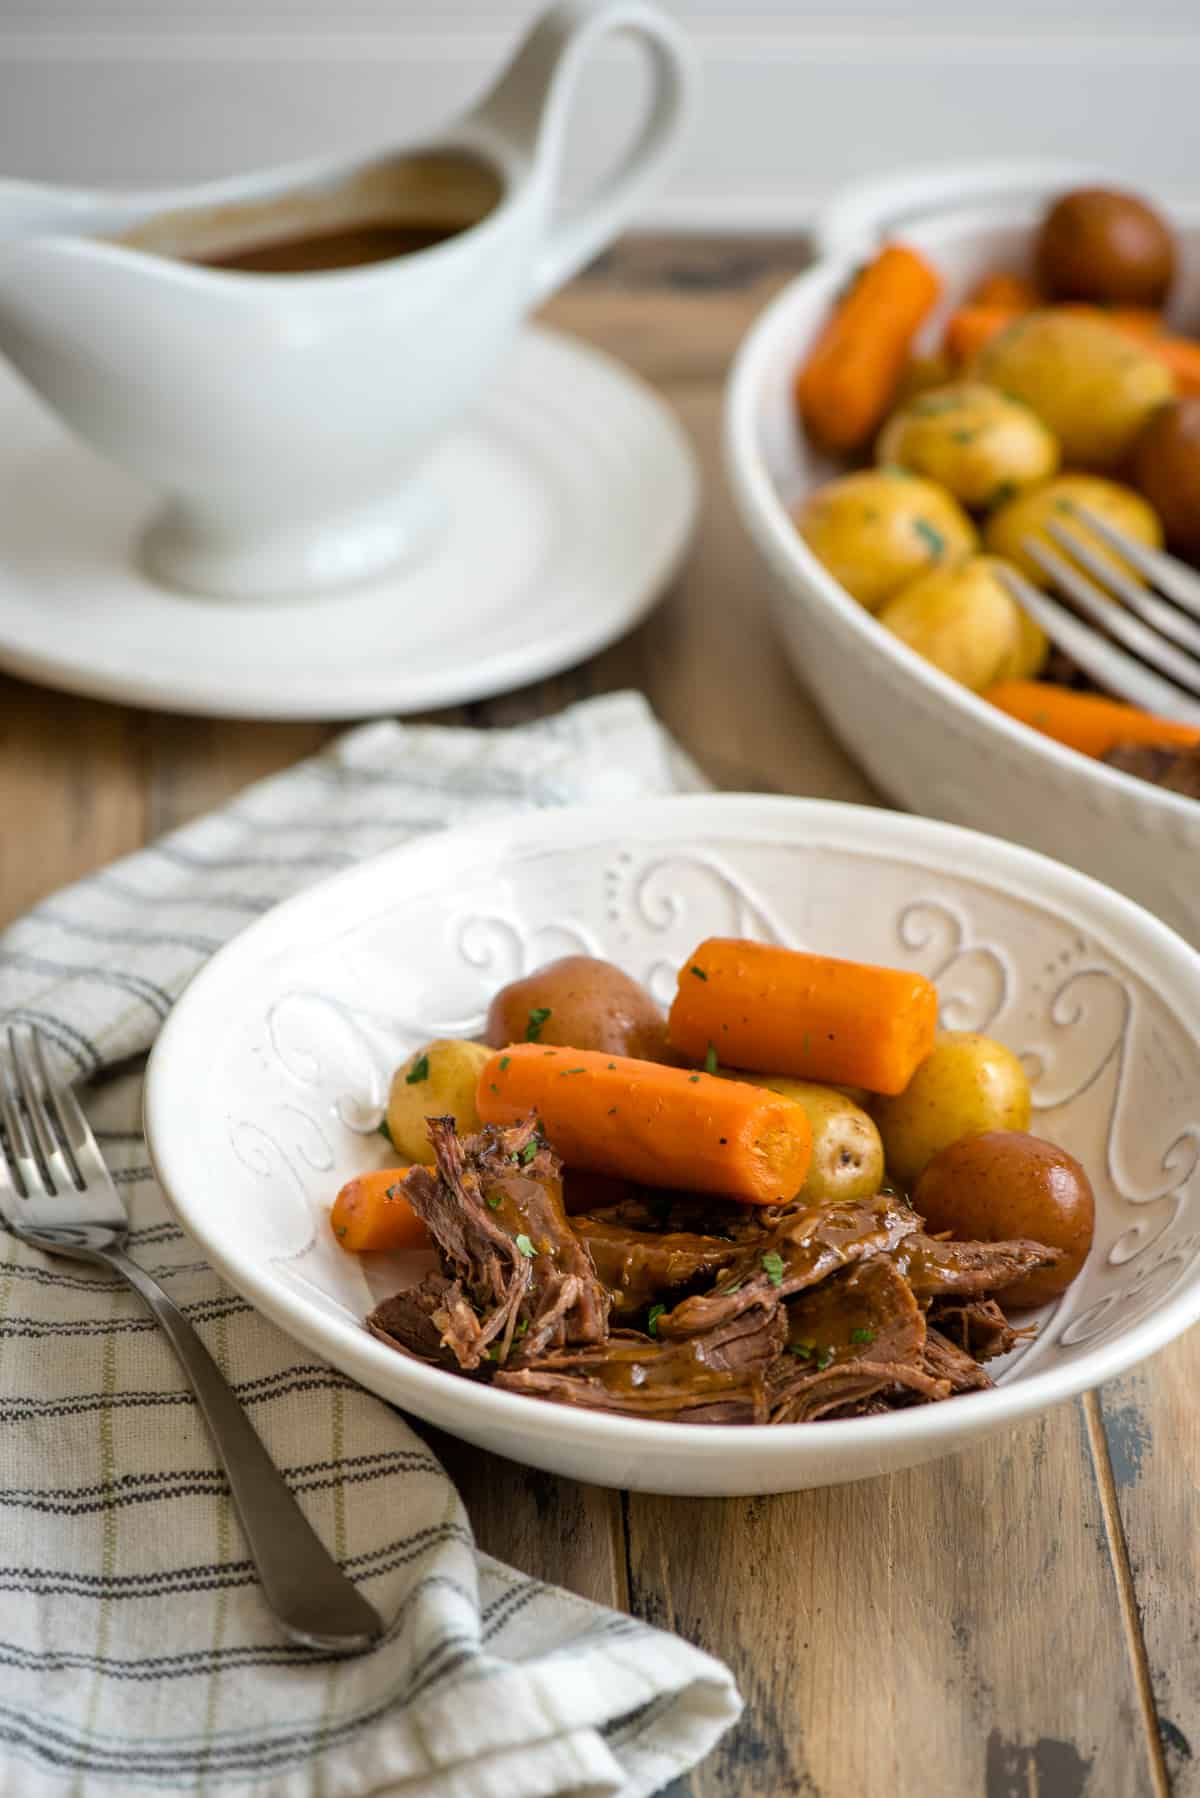  A serving of pot roast with carrots and potatoes in a white bowl.